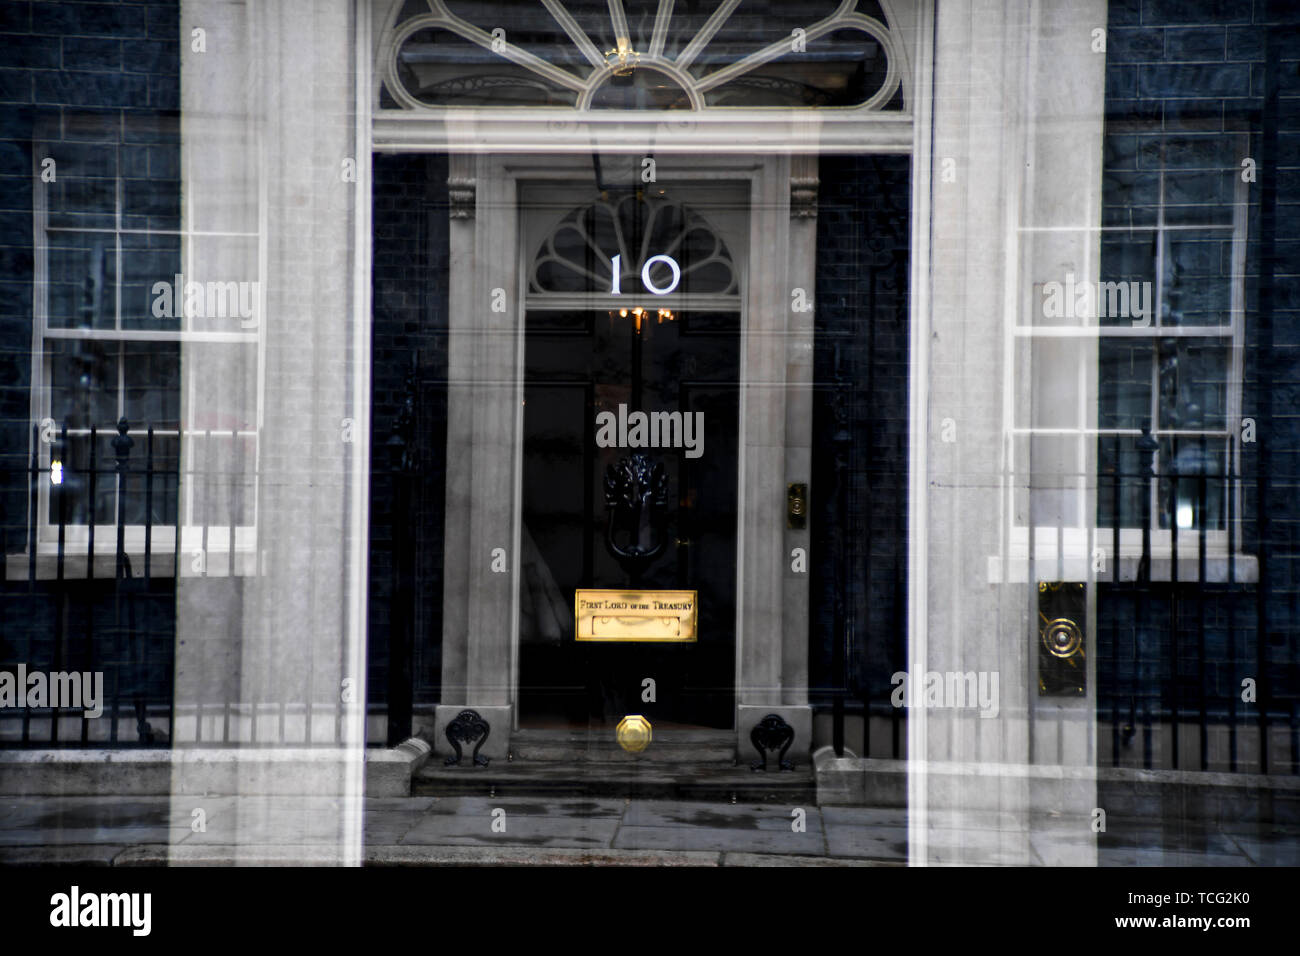 (190607) -- LONDON, June 7, 2019 (Xinhua) -- The photo taken on June 7, 2019 shows 10 Downing Street in London, Britain. Theresa May stepped down Friday as leader of Britain's governing Conservative Party, but she will remain as prime minister until her successor is chosen. (Xinhua/Alberto Pezzali) Stock Photo